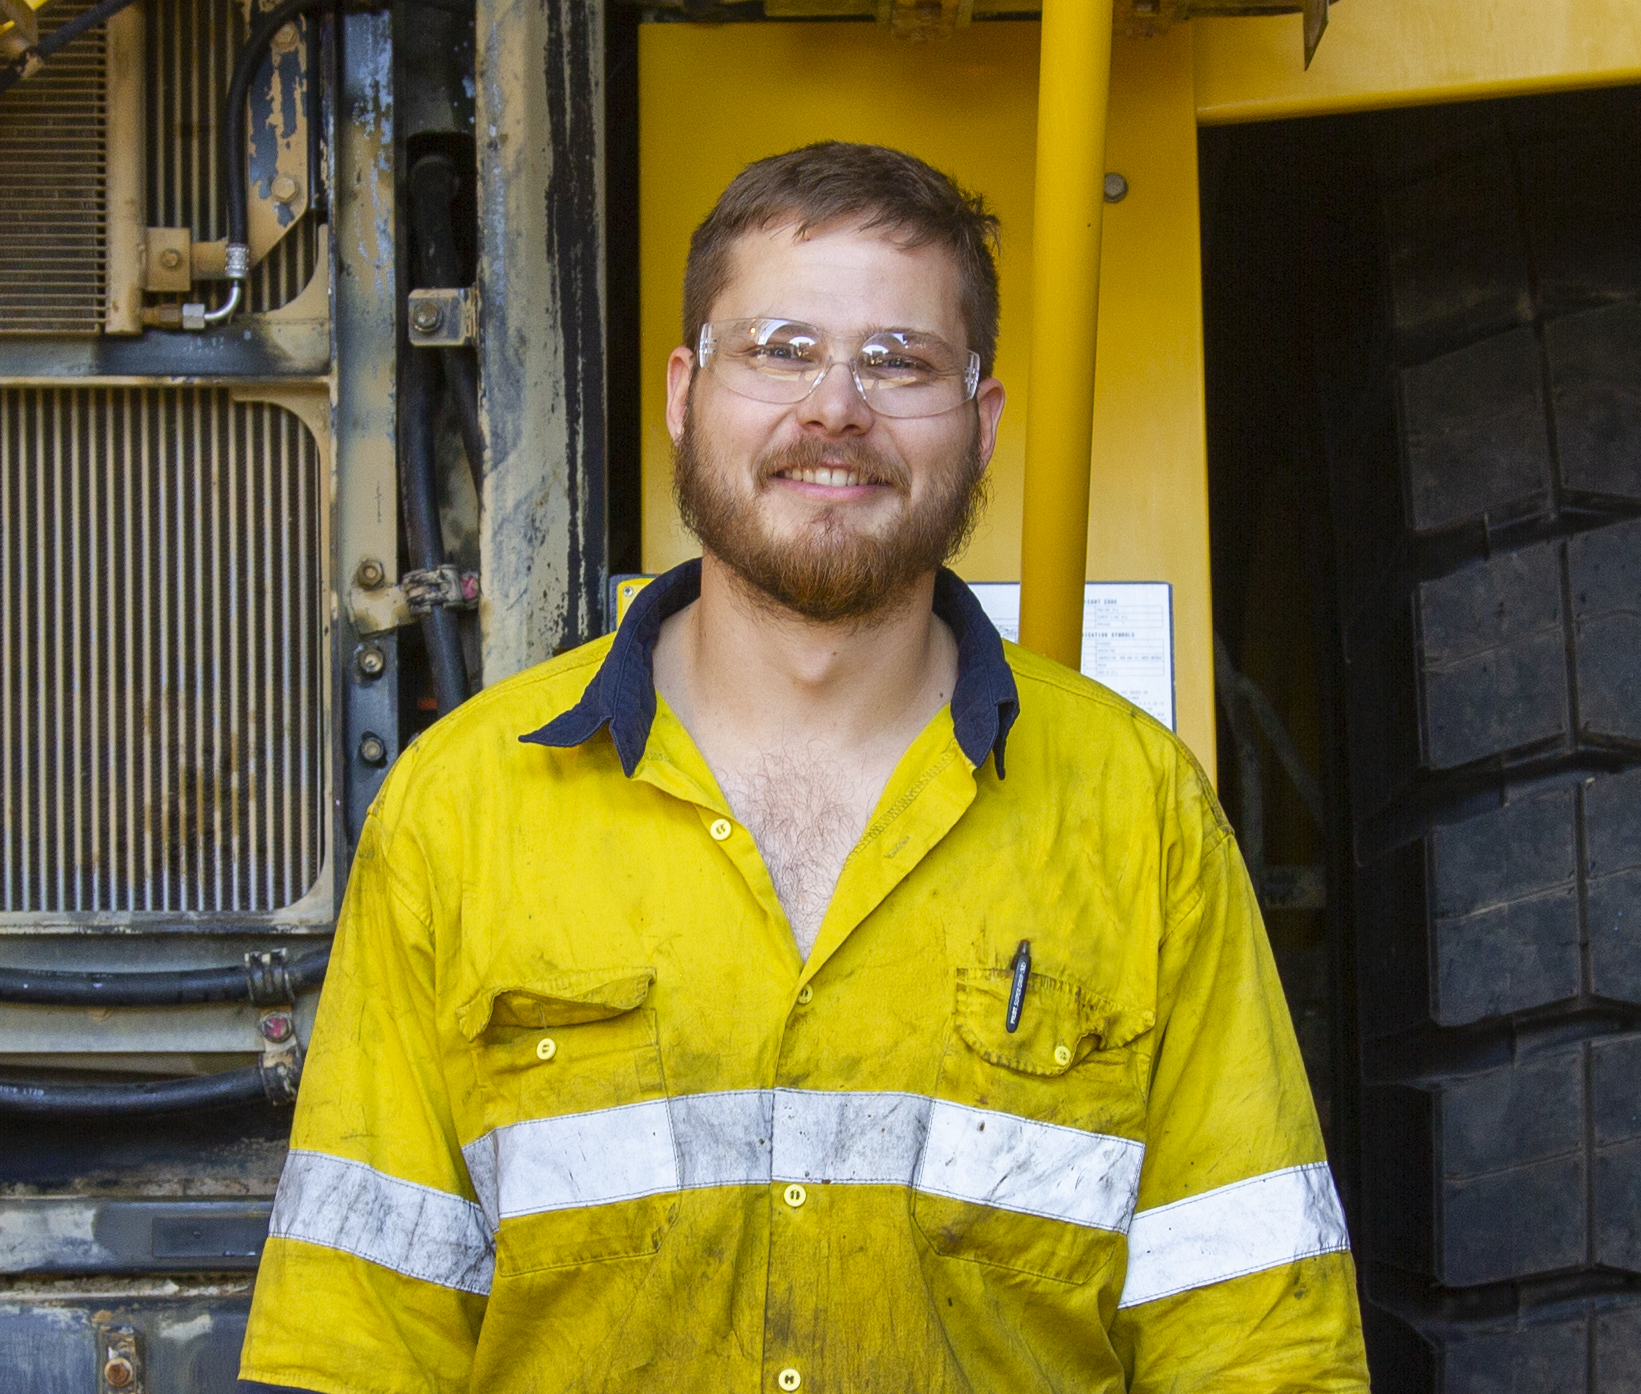 <em>Jenaro</em> - Hired, upskilled and now working for Blue Tongue as a Heavy Mobile Plant Technician at NRW Mining & Civil 2